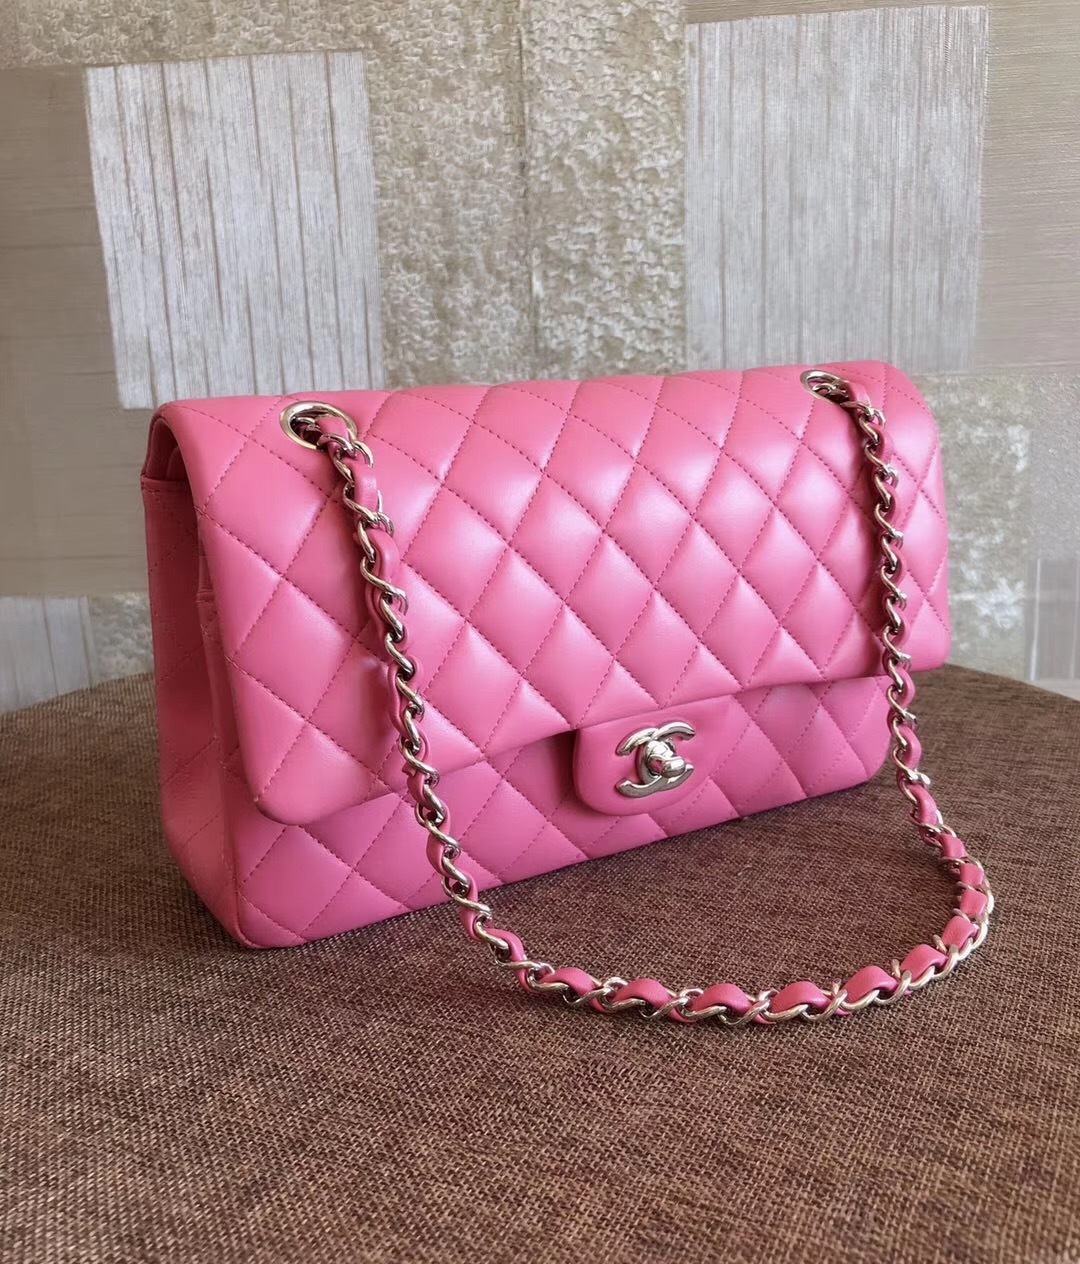 BRAND NEW AUTHENTIC CHANEL 2019 PINK QUILTED LAMBSKIN MEDIUM DOUBLE ...